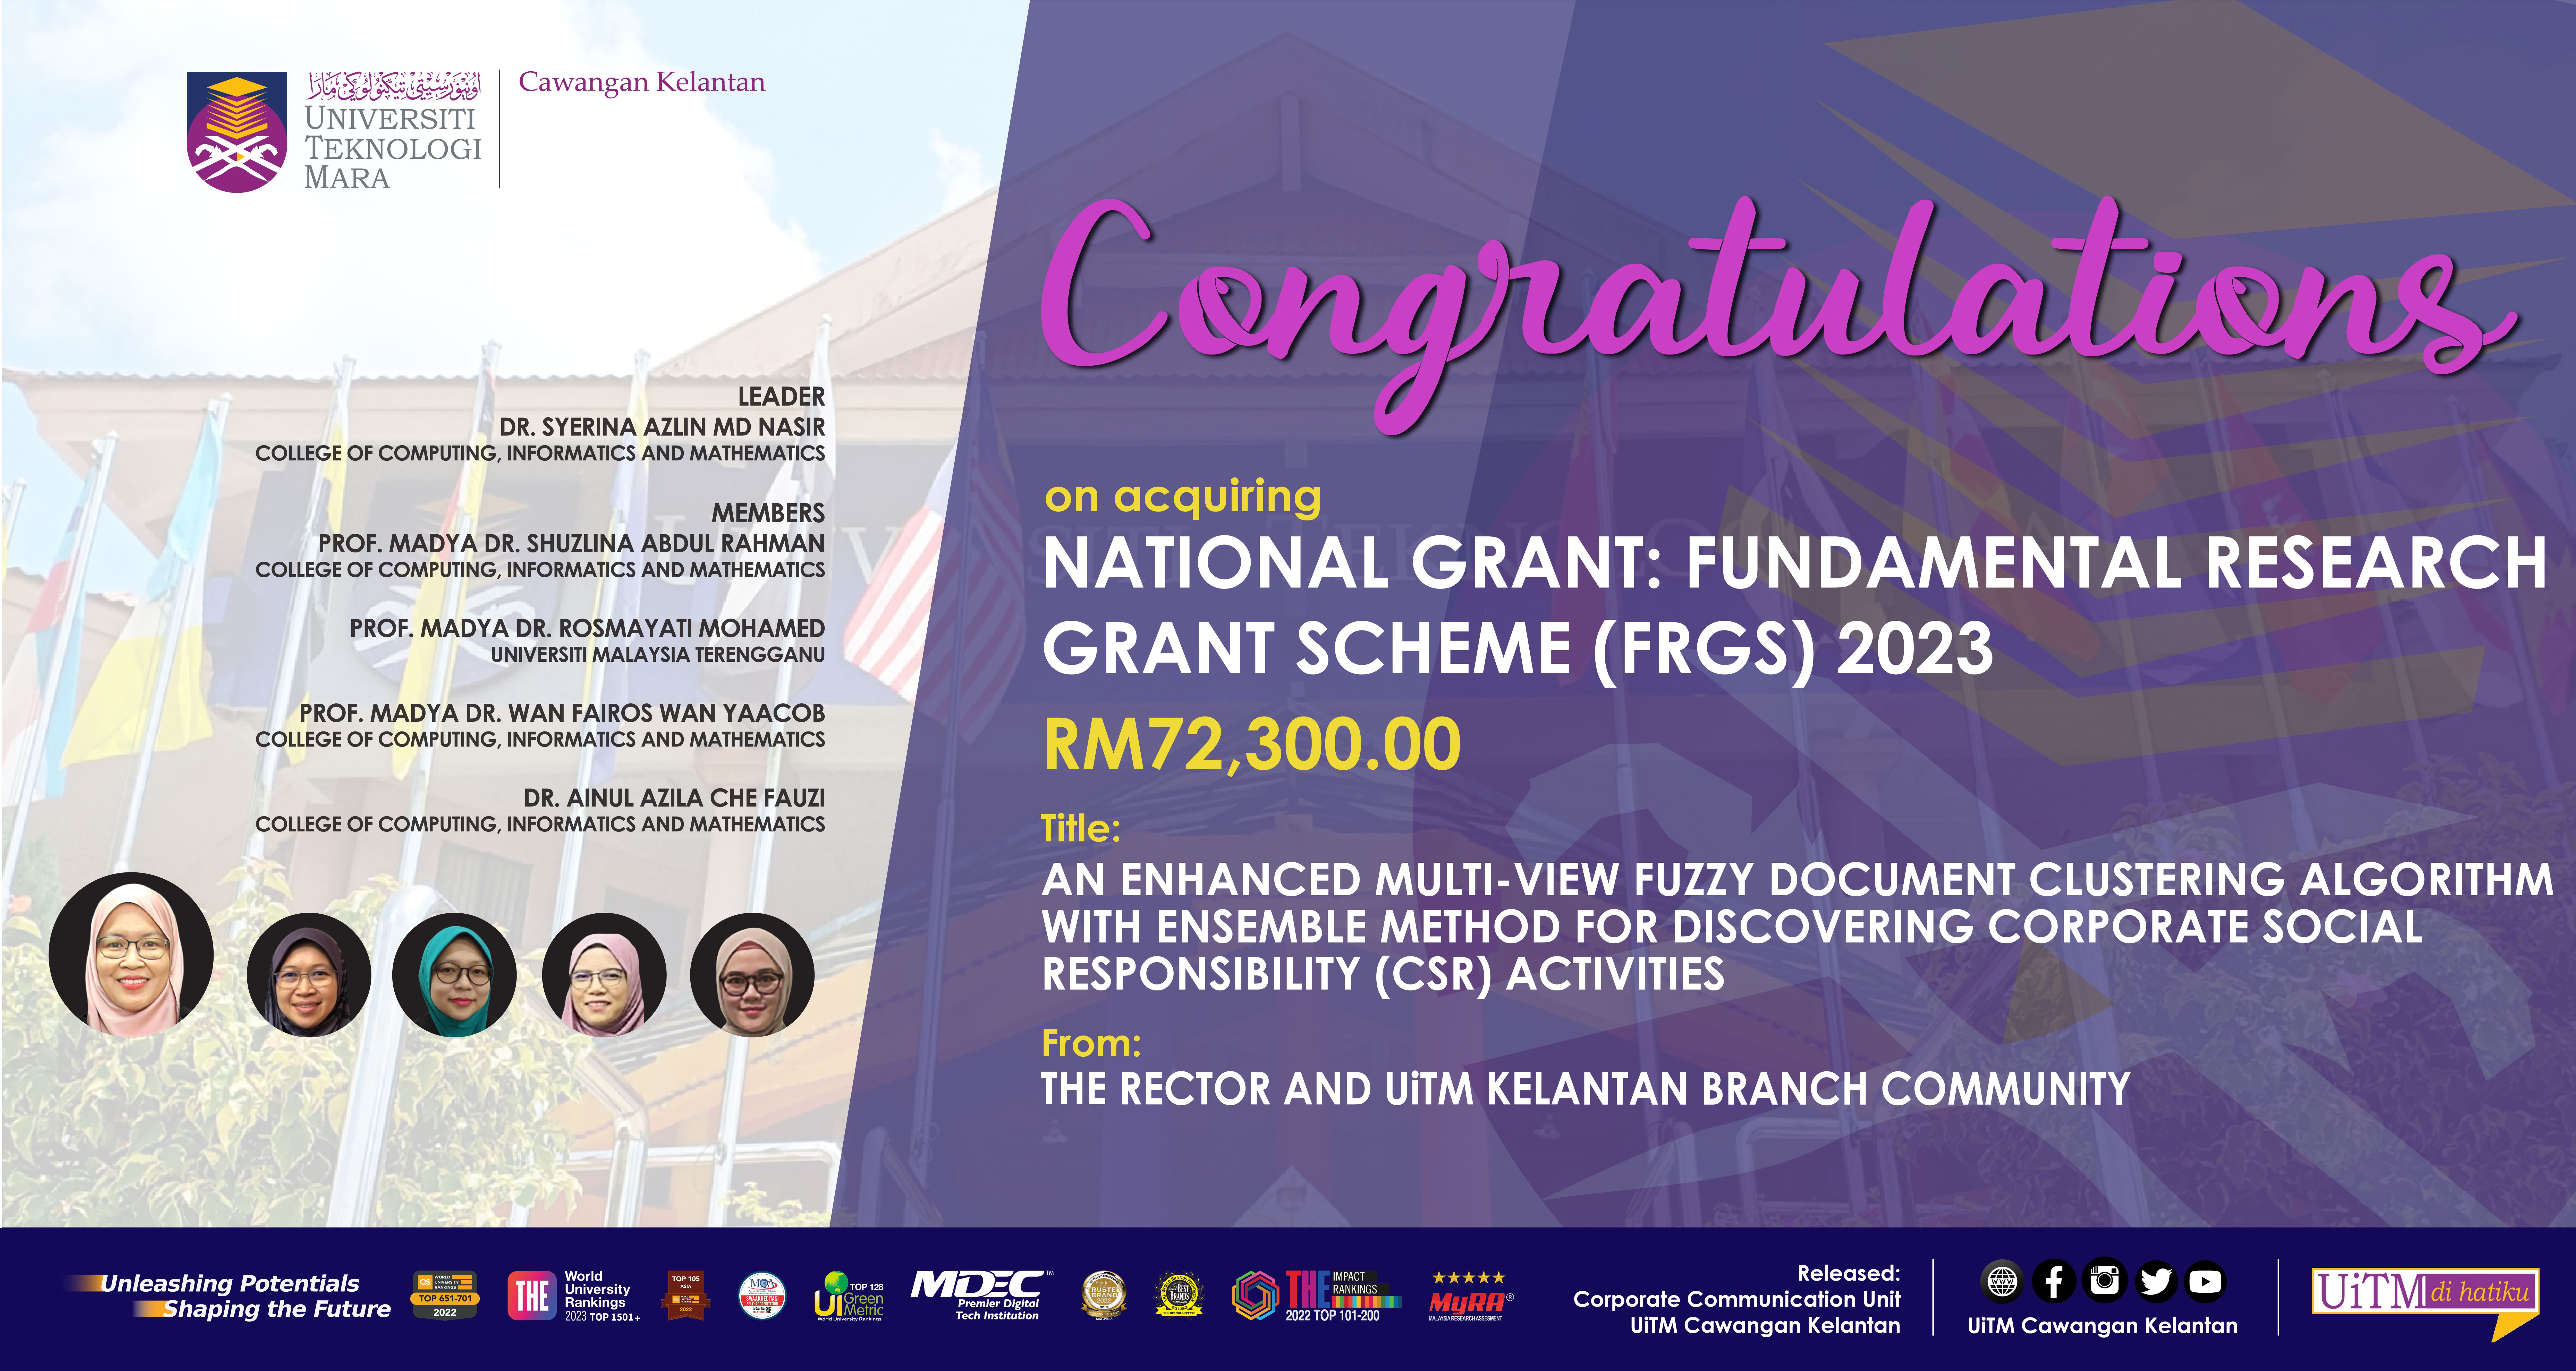 Congratulations!!! National Grant: Fundamental Research Grant Scheme (FRGS) 2023 (An Enhanced Multi-view Fuzzy Document Clustering Algorithm with Ensemble Method for Discovering Corporate Social Responsibility (CSR) Activities)